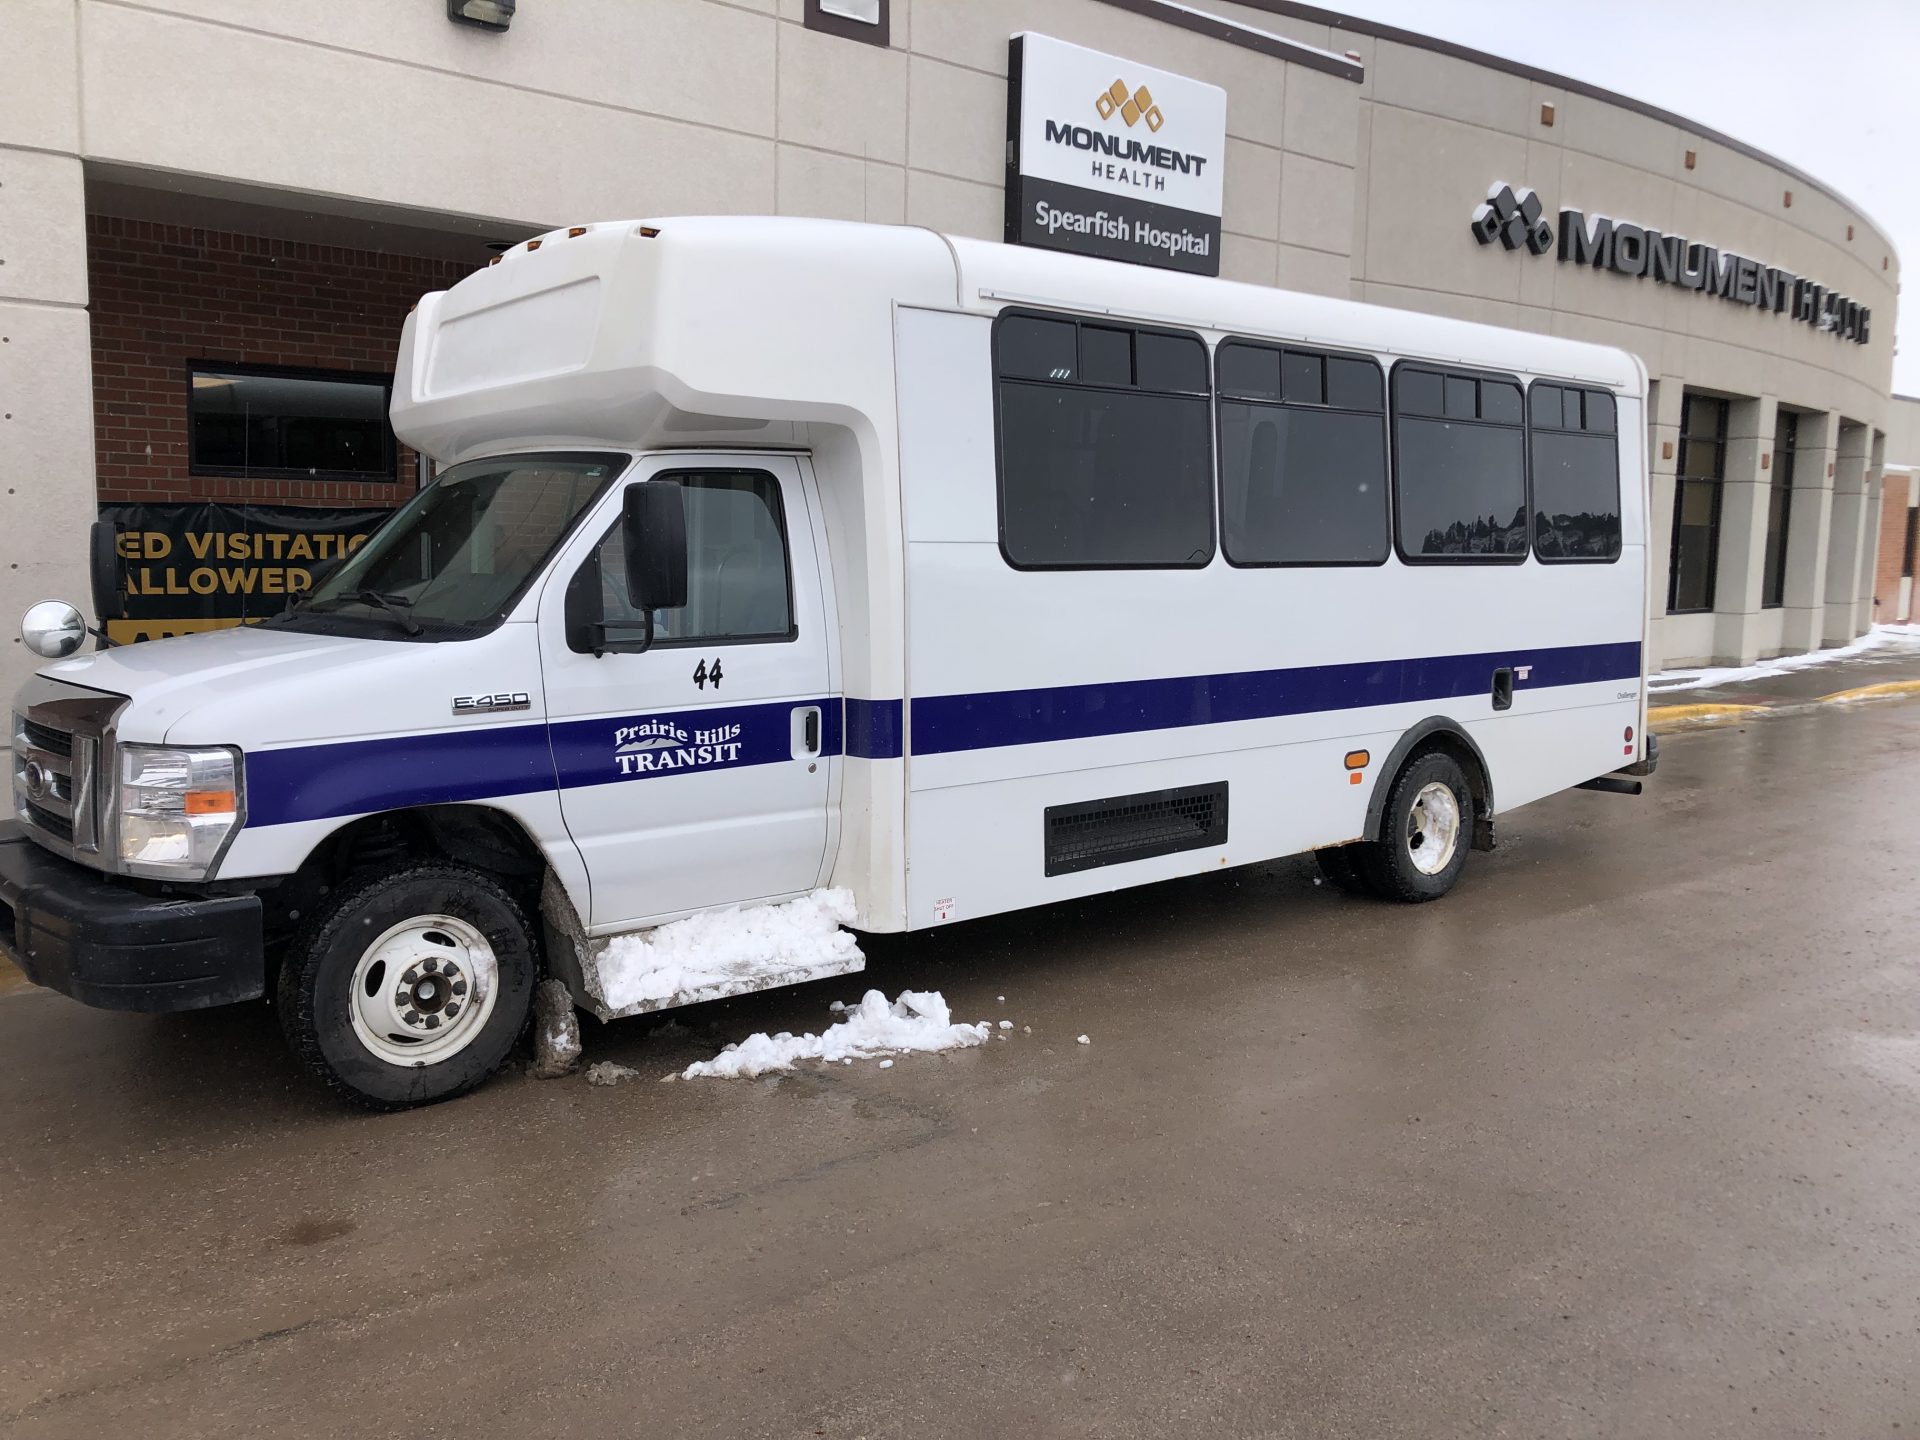 A white bus waits in front of a long hospital building. Snow is on the ground.